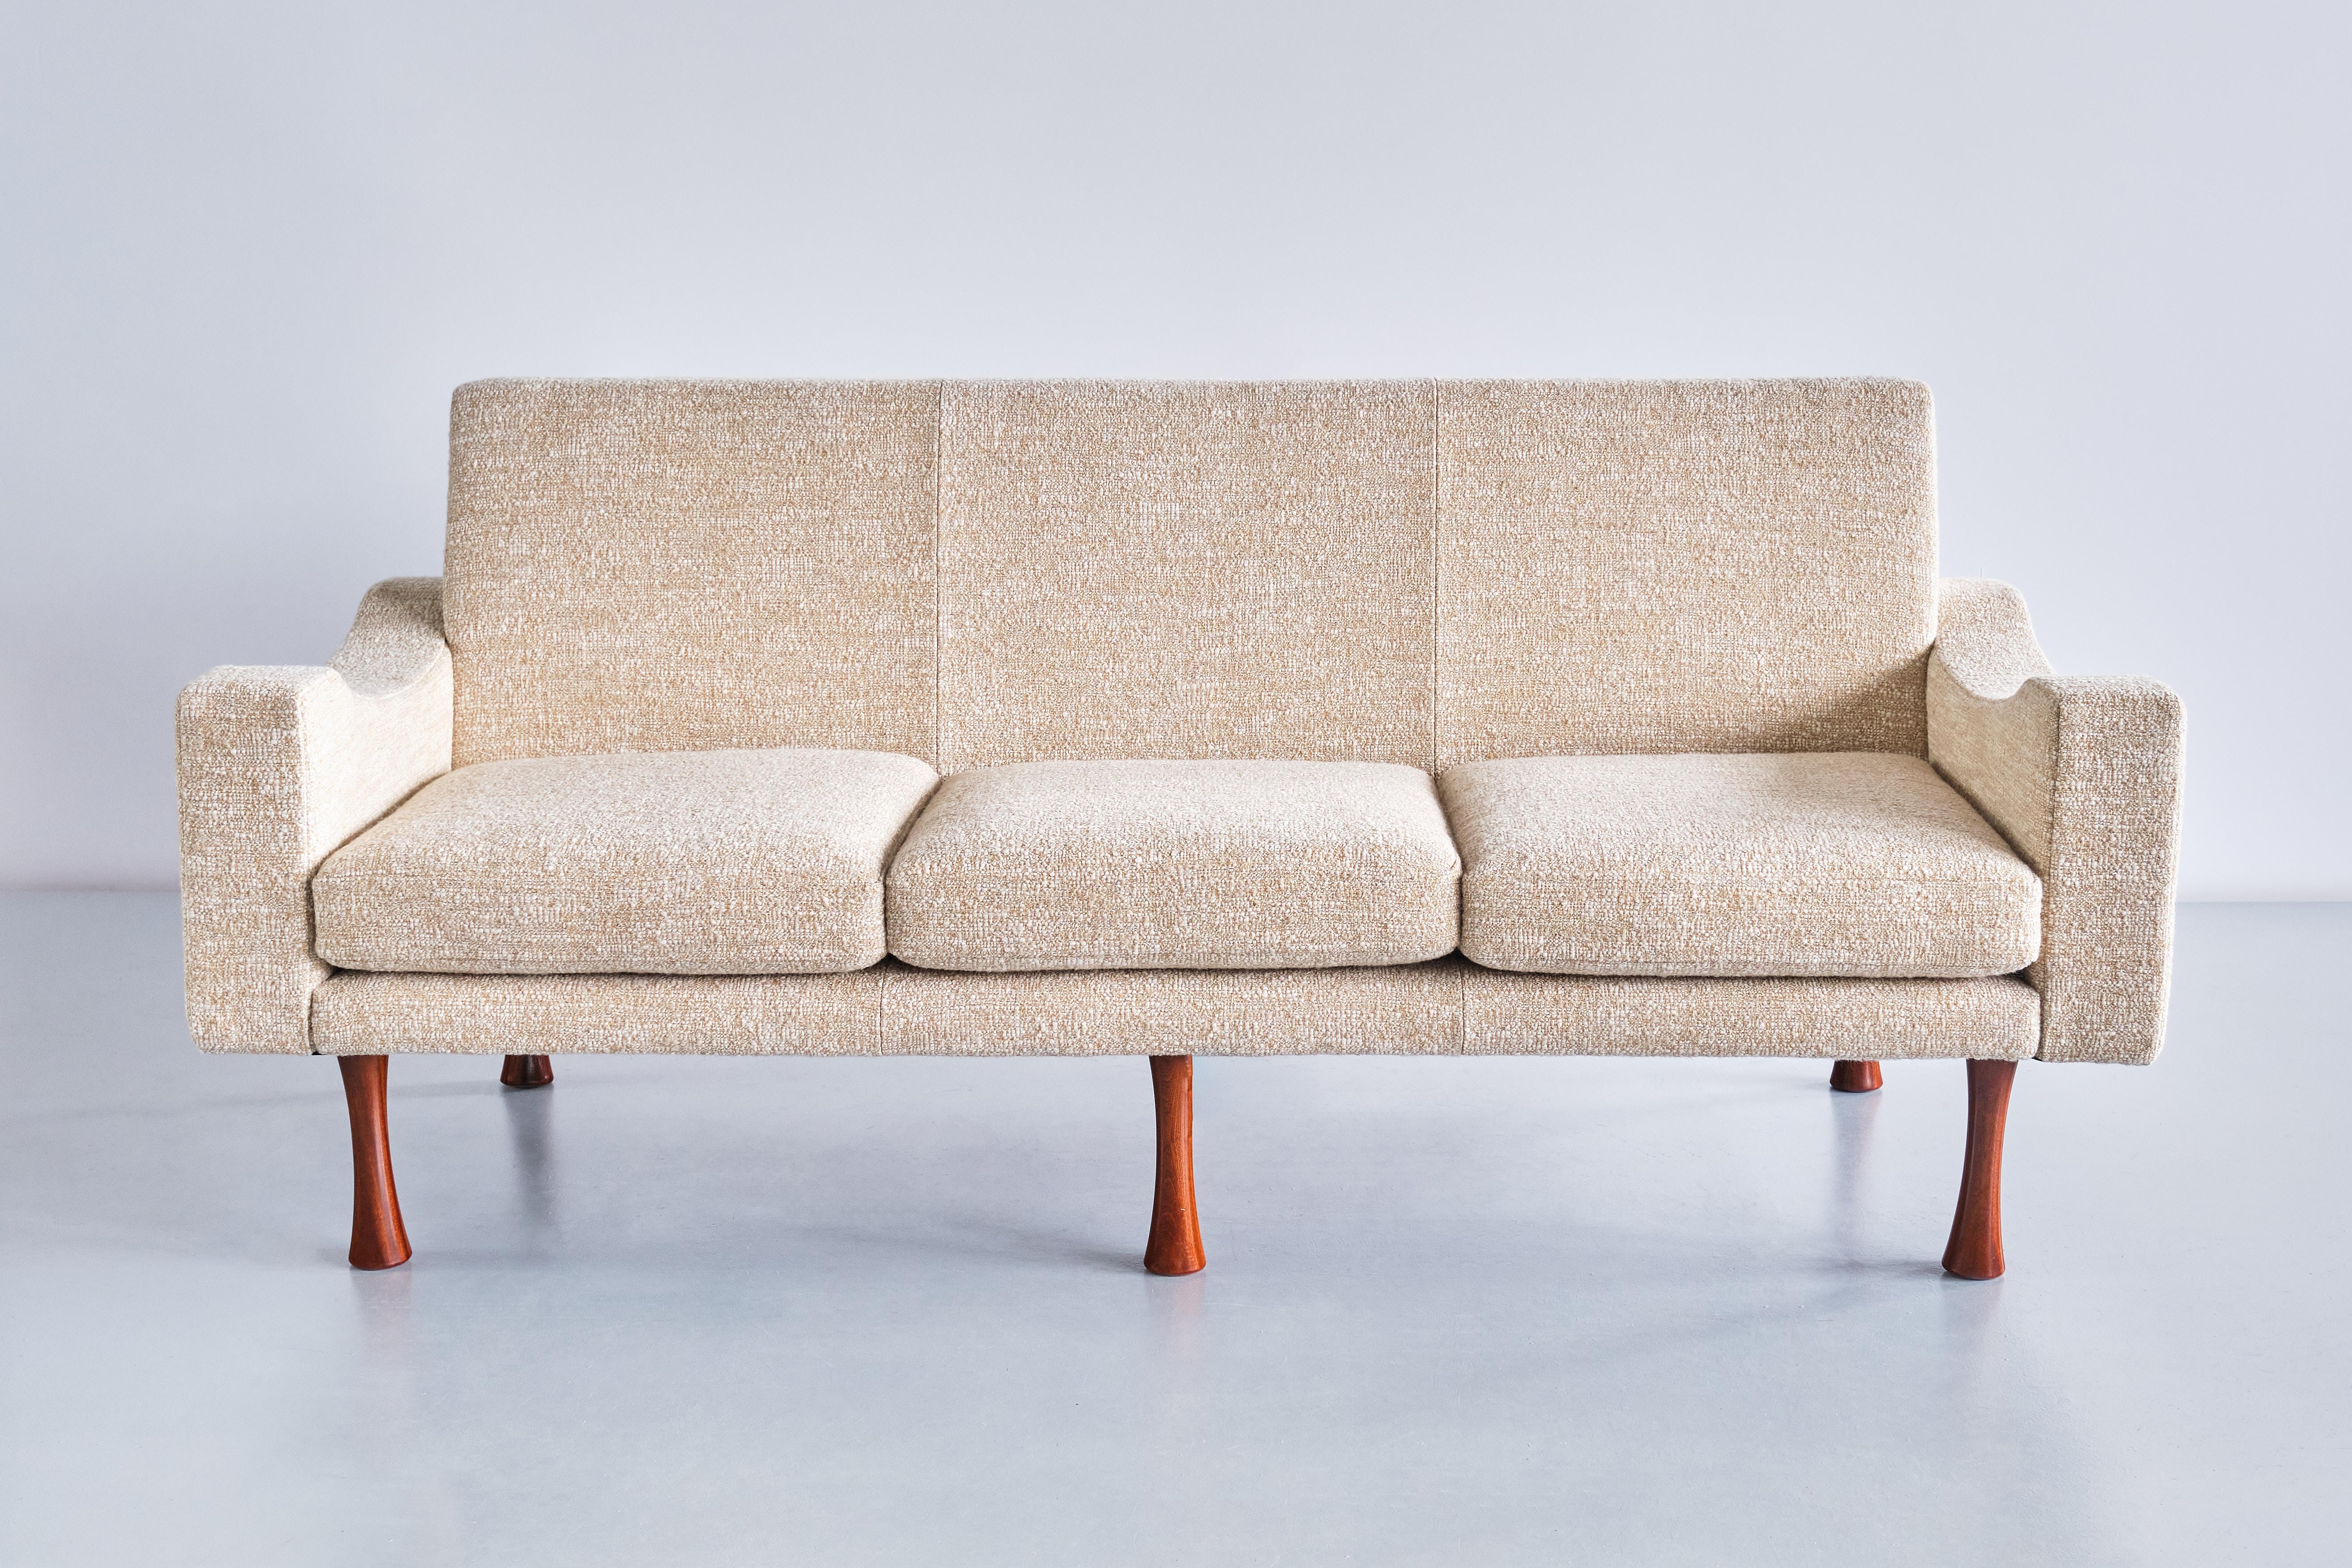 This very rare three seat sofa was designed by Angelo Mangiarotti and produced by the Italian manufacturer La Sorgente dei Mobili in the early 1970s. The design is marked by the geometric shapes of the upholstered frame combined with a curved